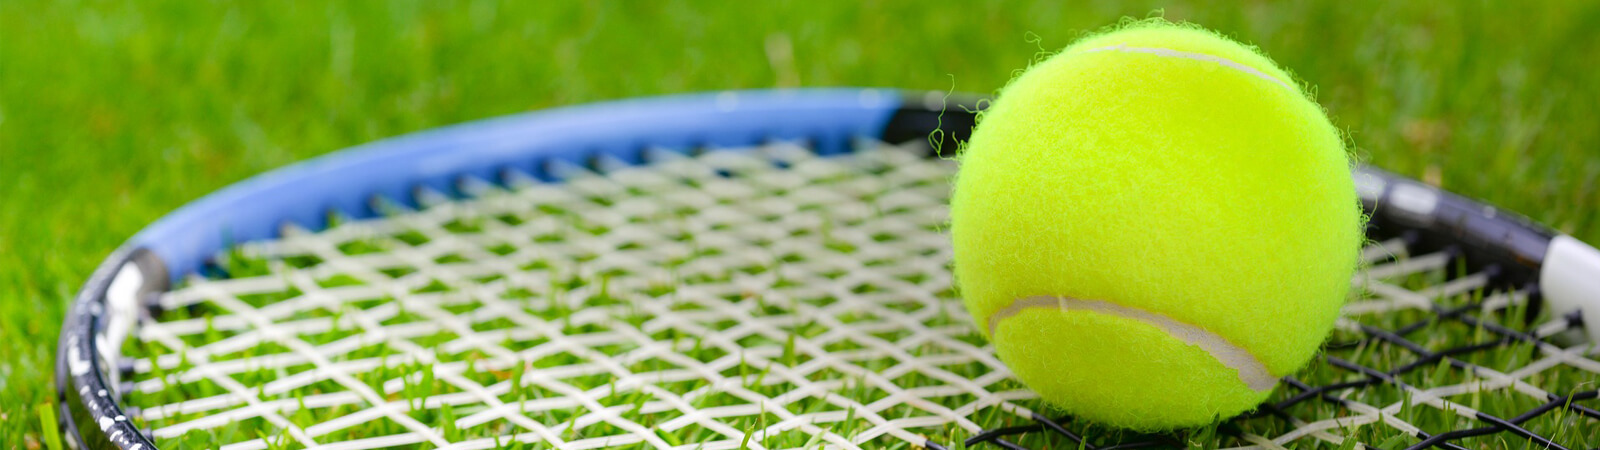 Our Useful Guide To The Wimbledon Championships